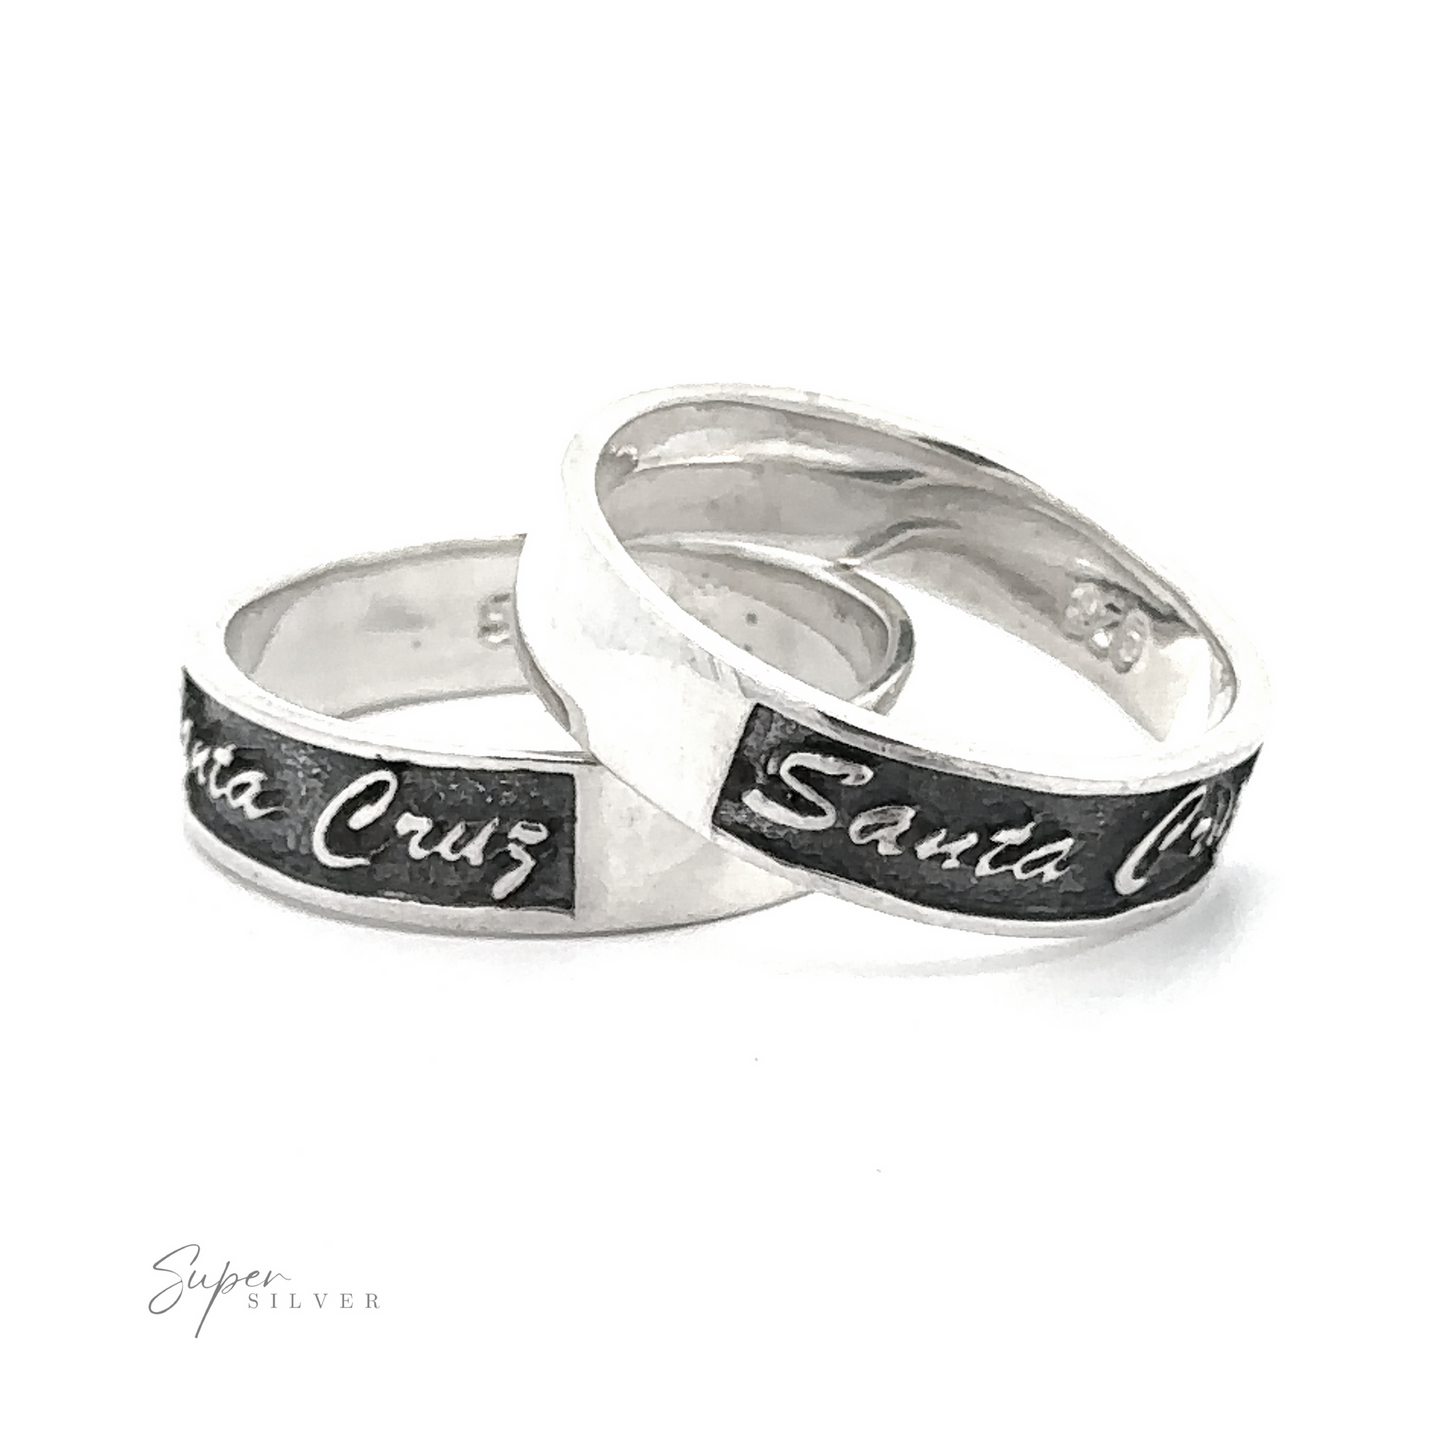 Two flat band Sterling Silver Santa Cruz rings engraved with "Santa Cruz" on a white background.